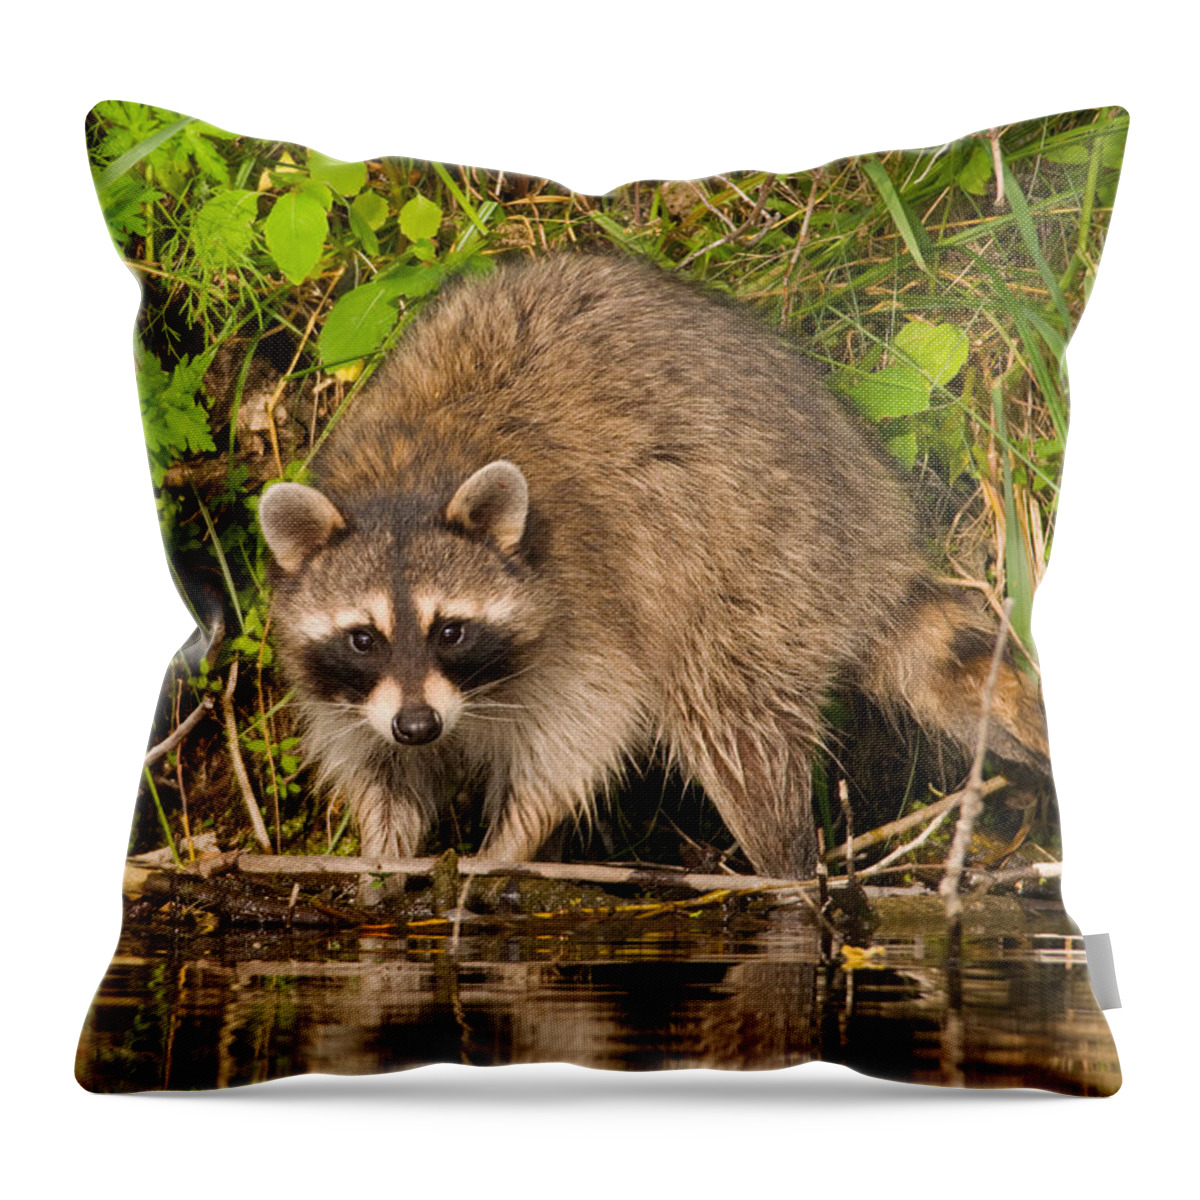 Mammal Throw Pillow featuring the photograph Riverbank Raccoon by Gerald DeBoer